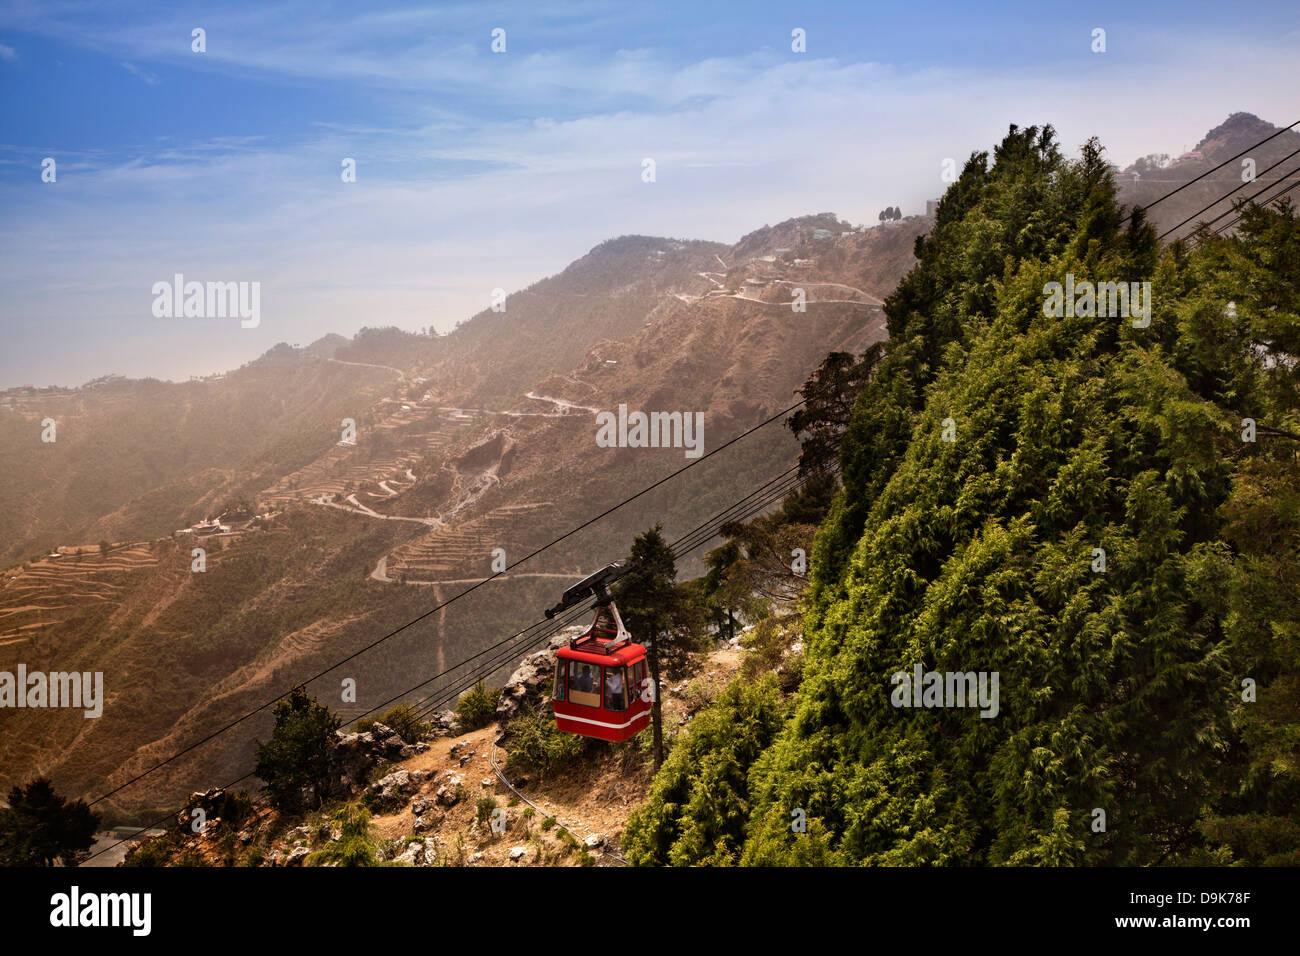 High Angle View of Overhead Cable Car passing through mountains, Gun Hill, Mussoorie, Uttarakhand, India Stock Photo